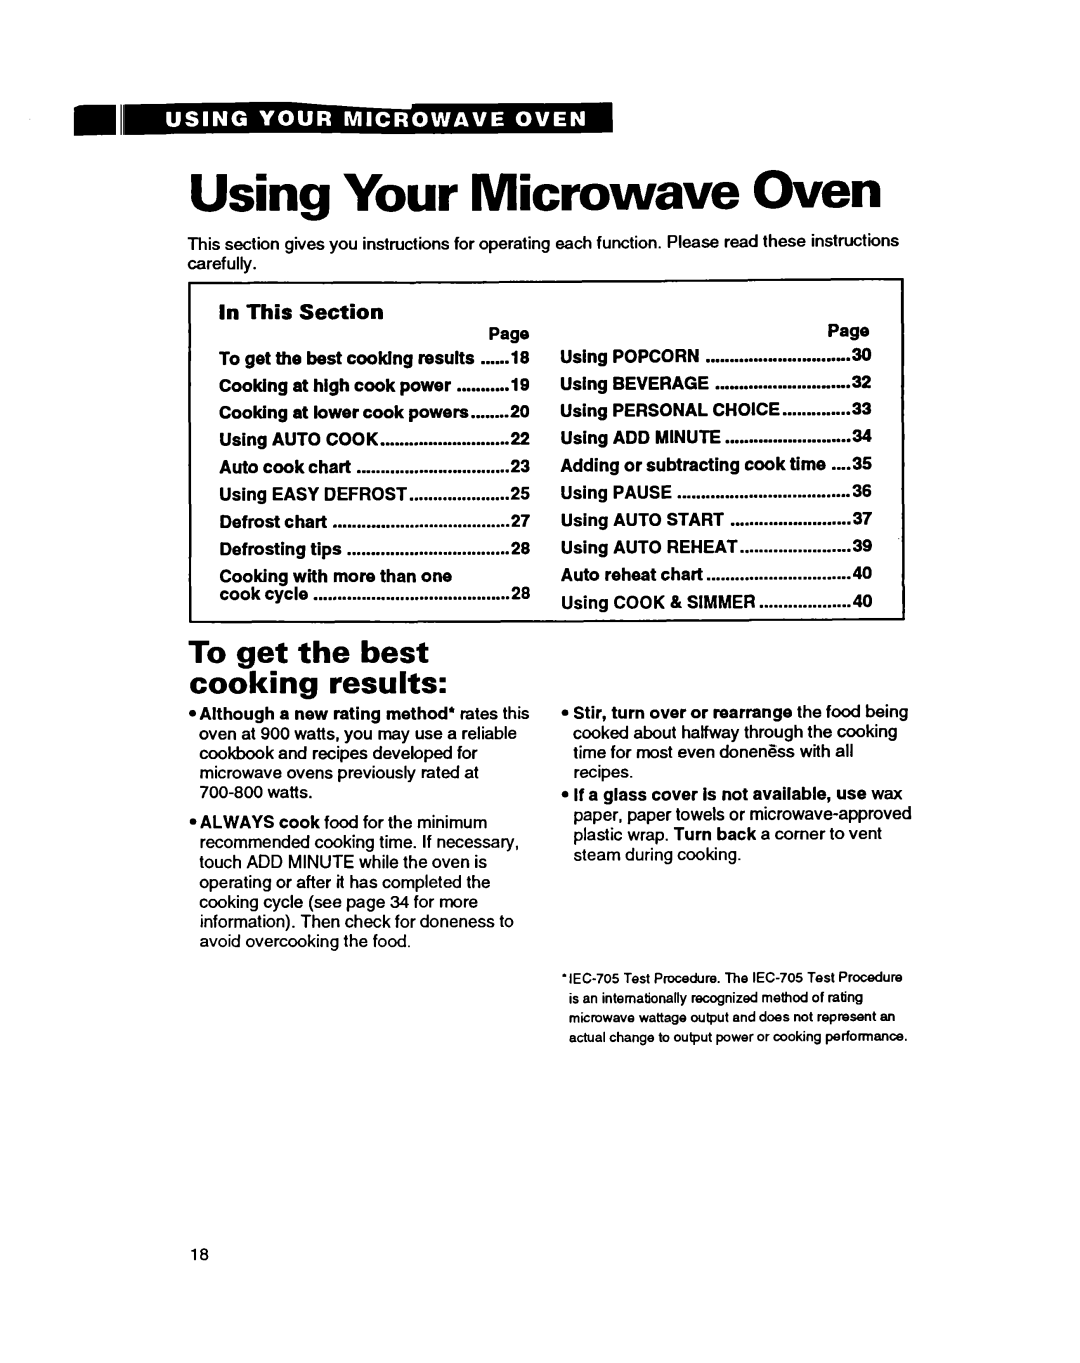 Whirlpool MT9160XBB warranty Using Your Microwave Oven, To get the best coGking results, In This, Section 